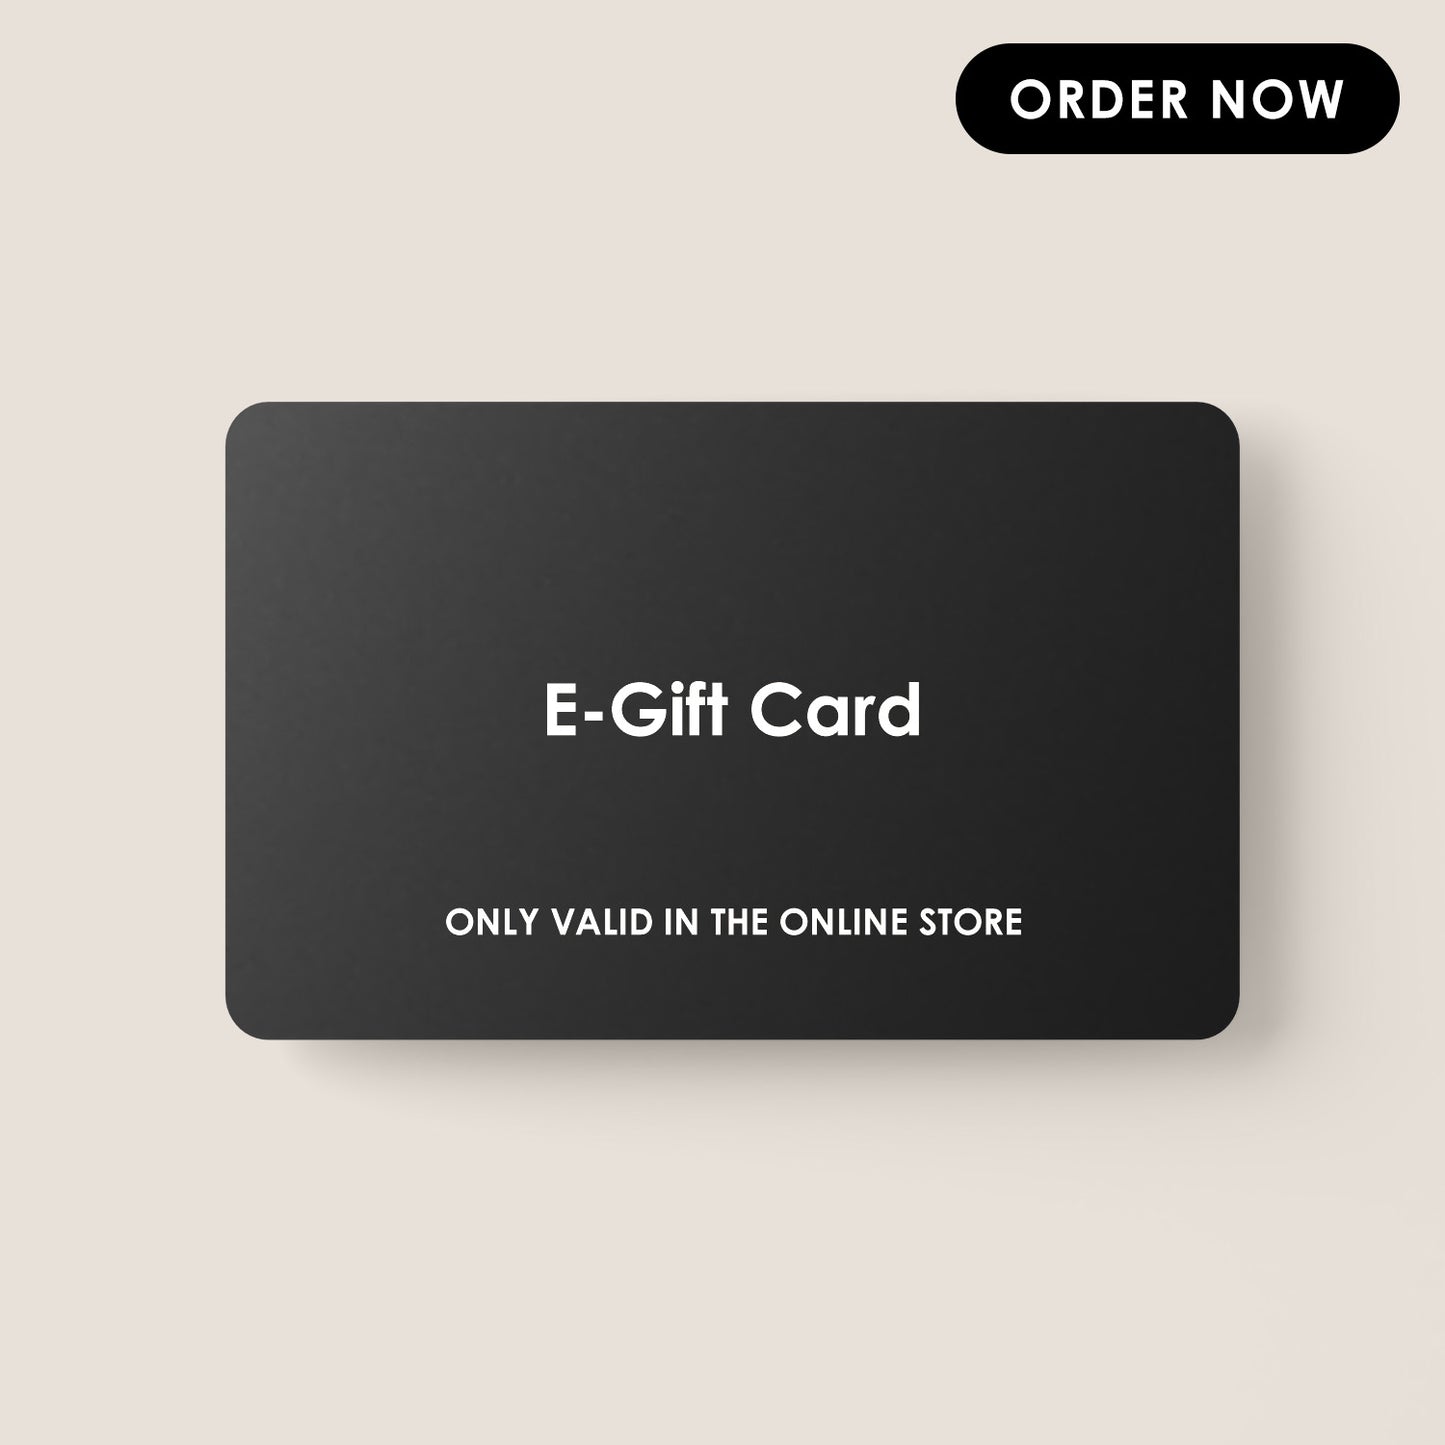 Online Store E-Gift Card